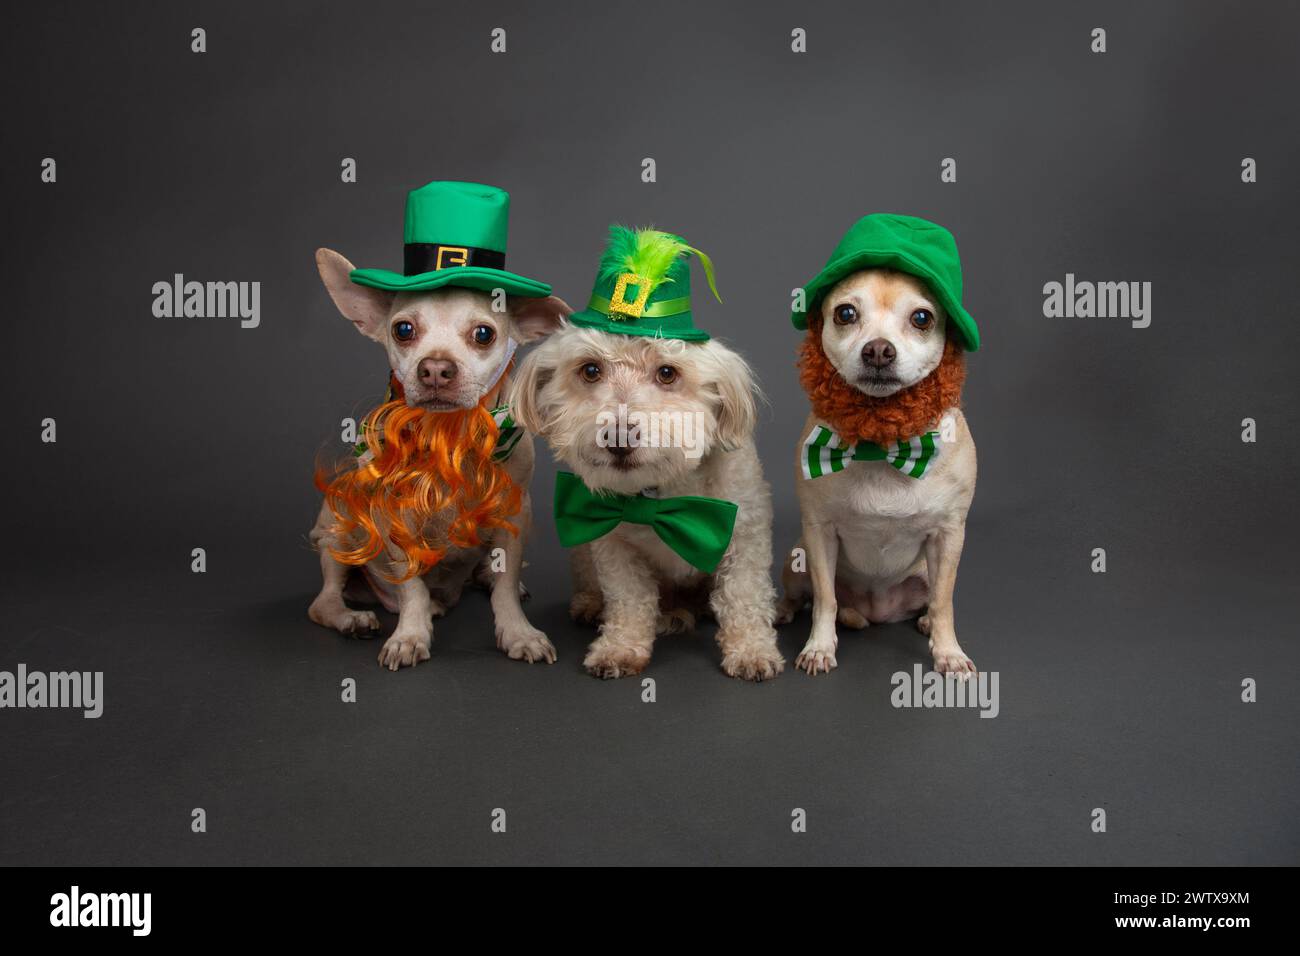 Havanese, Chihuahua and Cheagle sitting side by side dressed in St Patrick's Day outfits Stock Photo